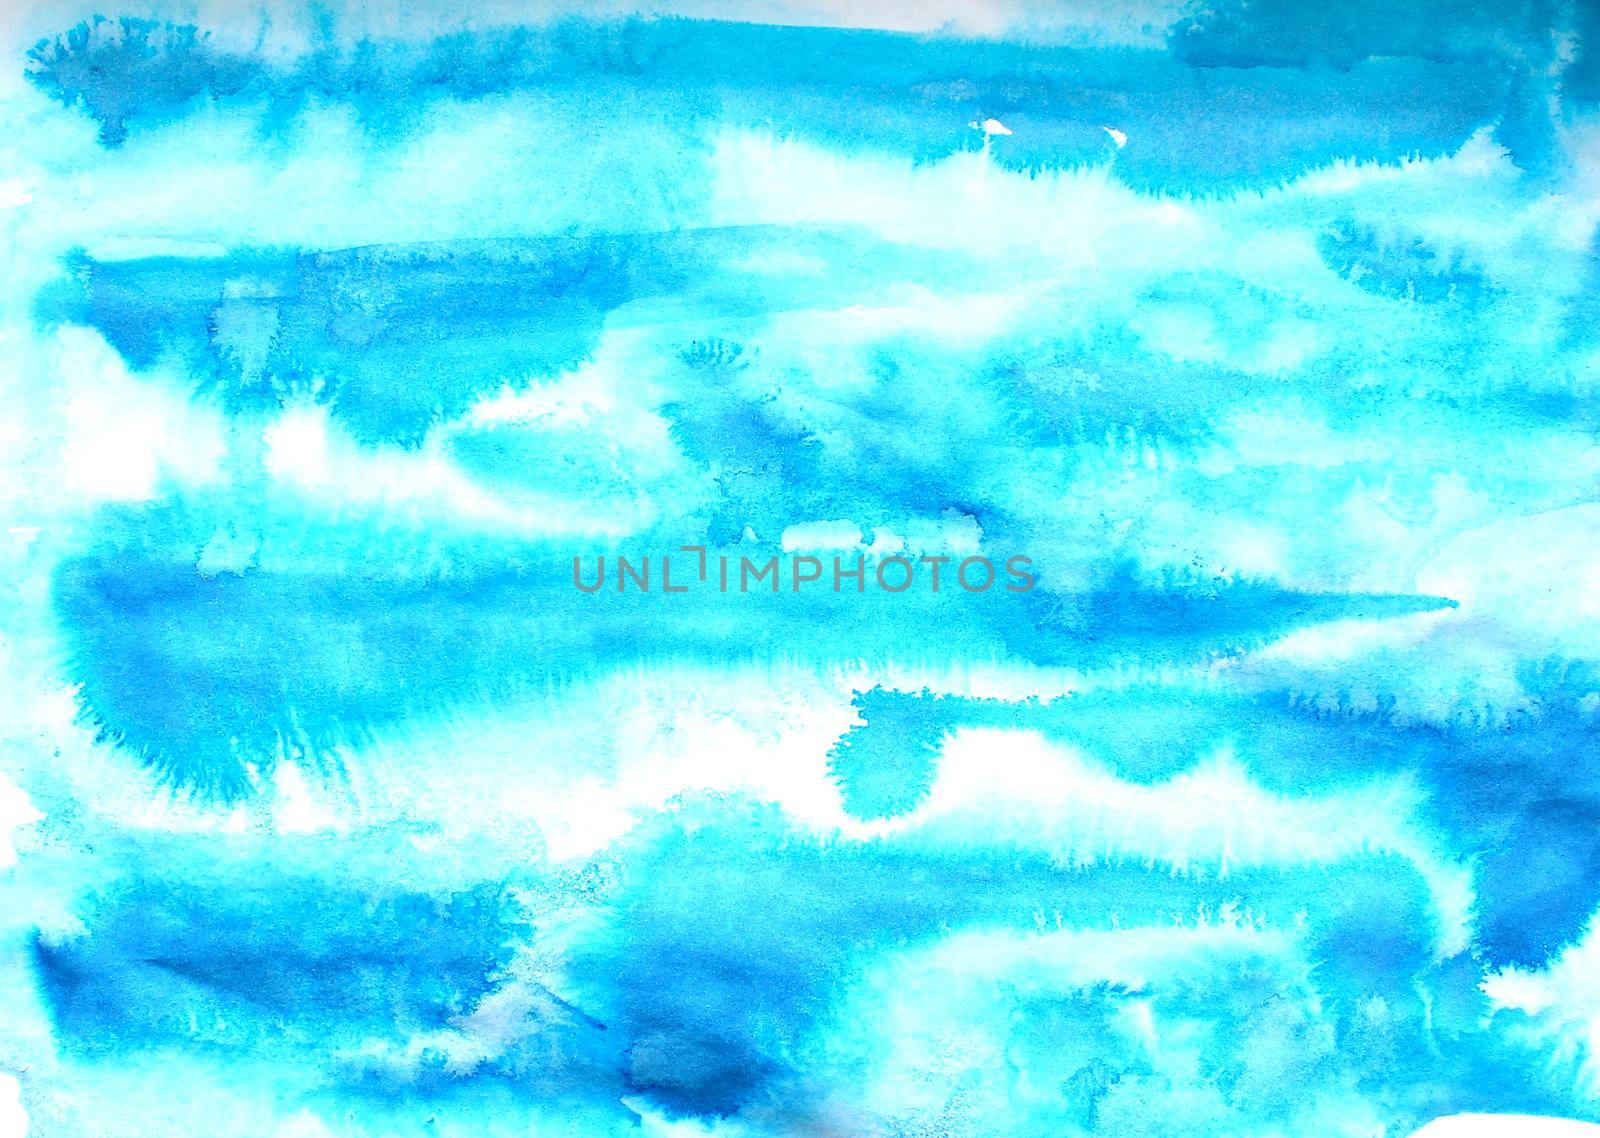 Abstract blue ink painting on grunge paper texture. Hand painted watercolor background. wash. Illustration stain and spot. Bright color. Unusual creativity art. Pattern